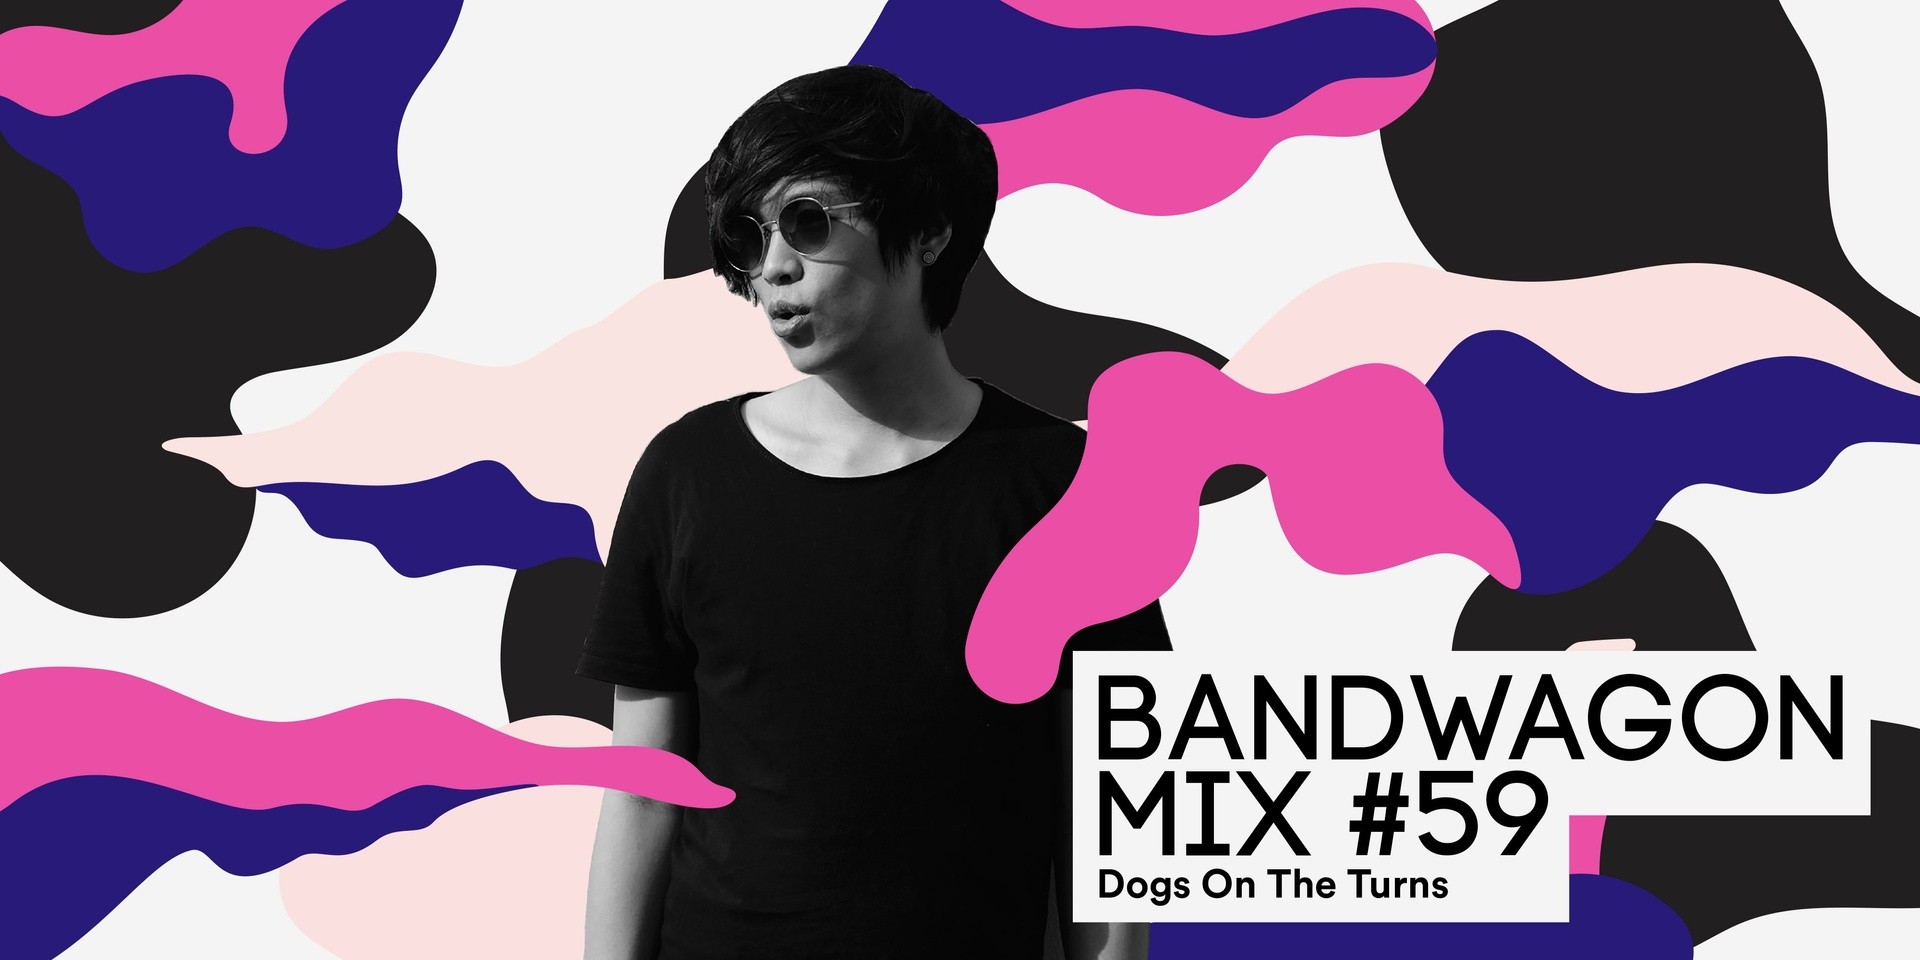 Bandwagon Mix #59: Dogs On The Turns